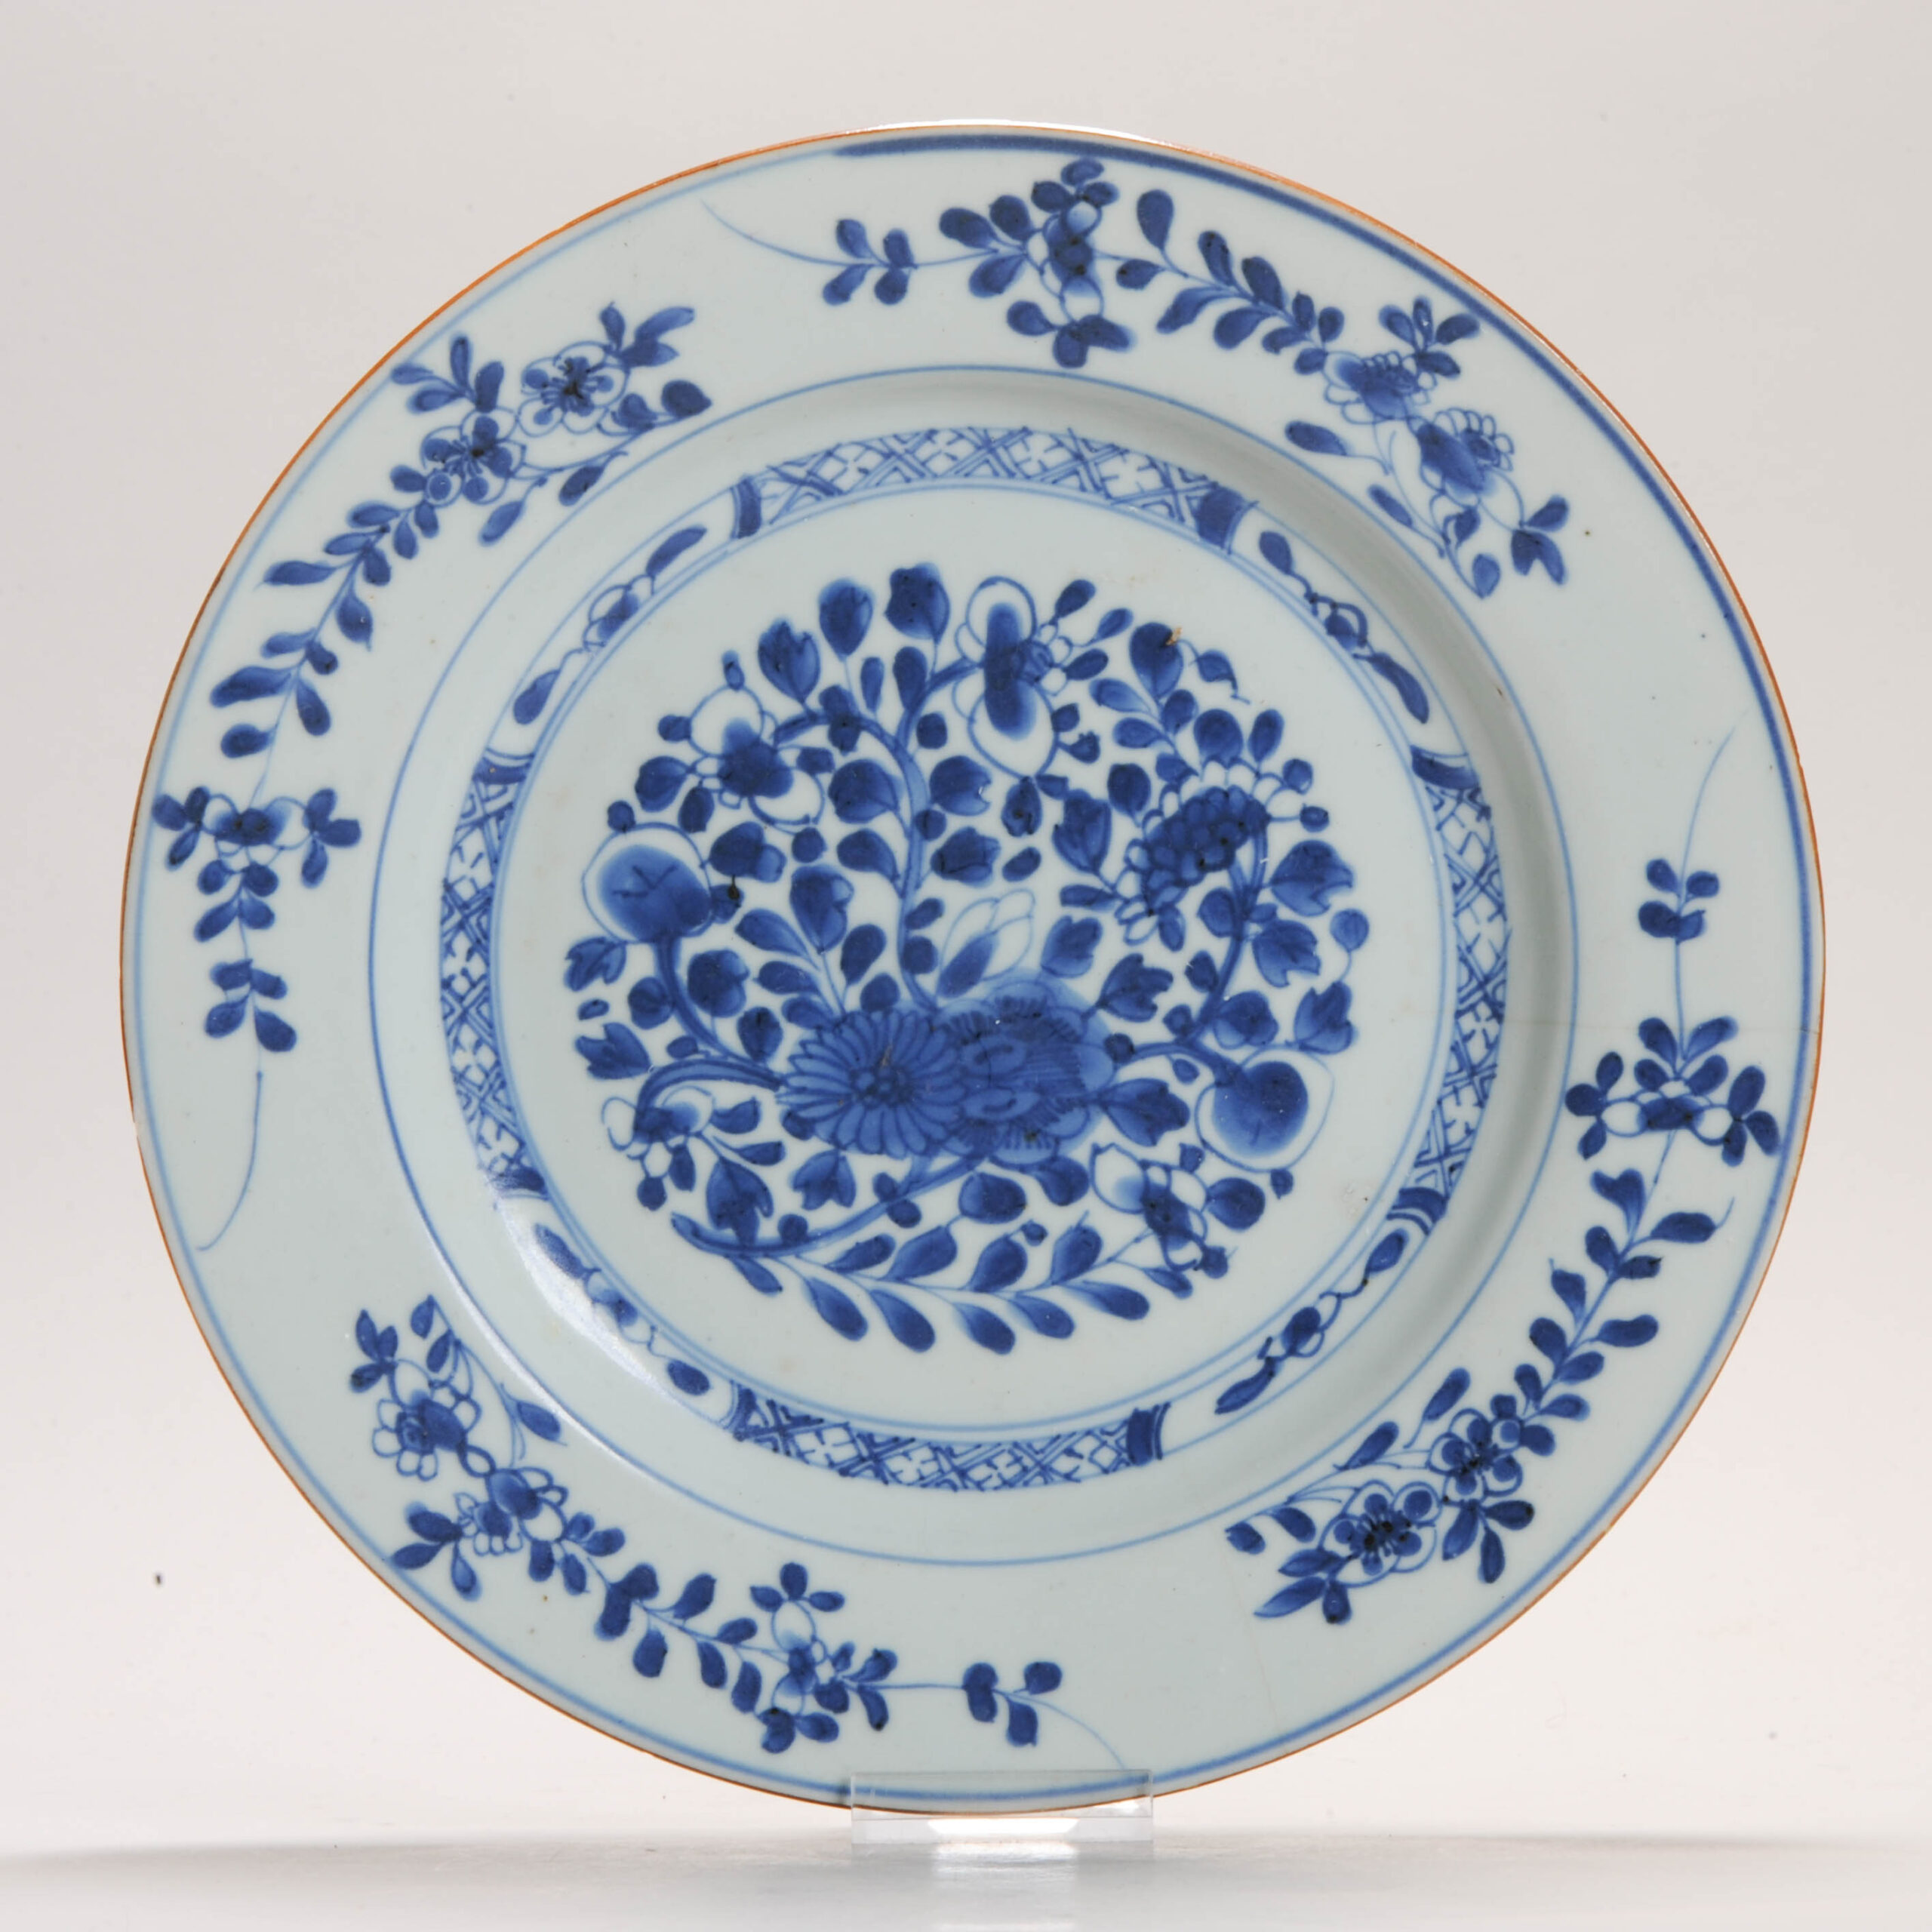 Antique Plate 18th Century Chinese Porcelain Blue and White Garden Qianlong